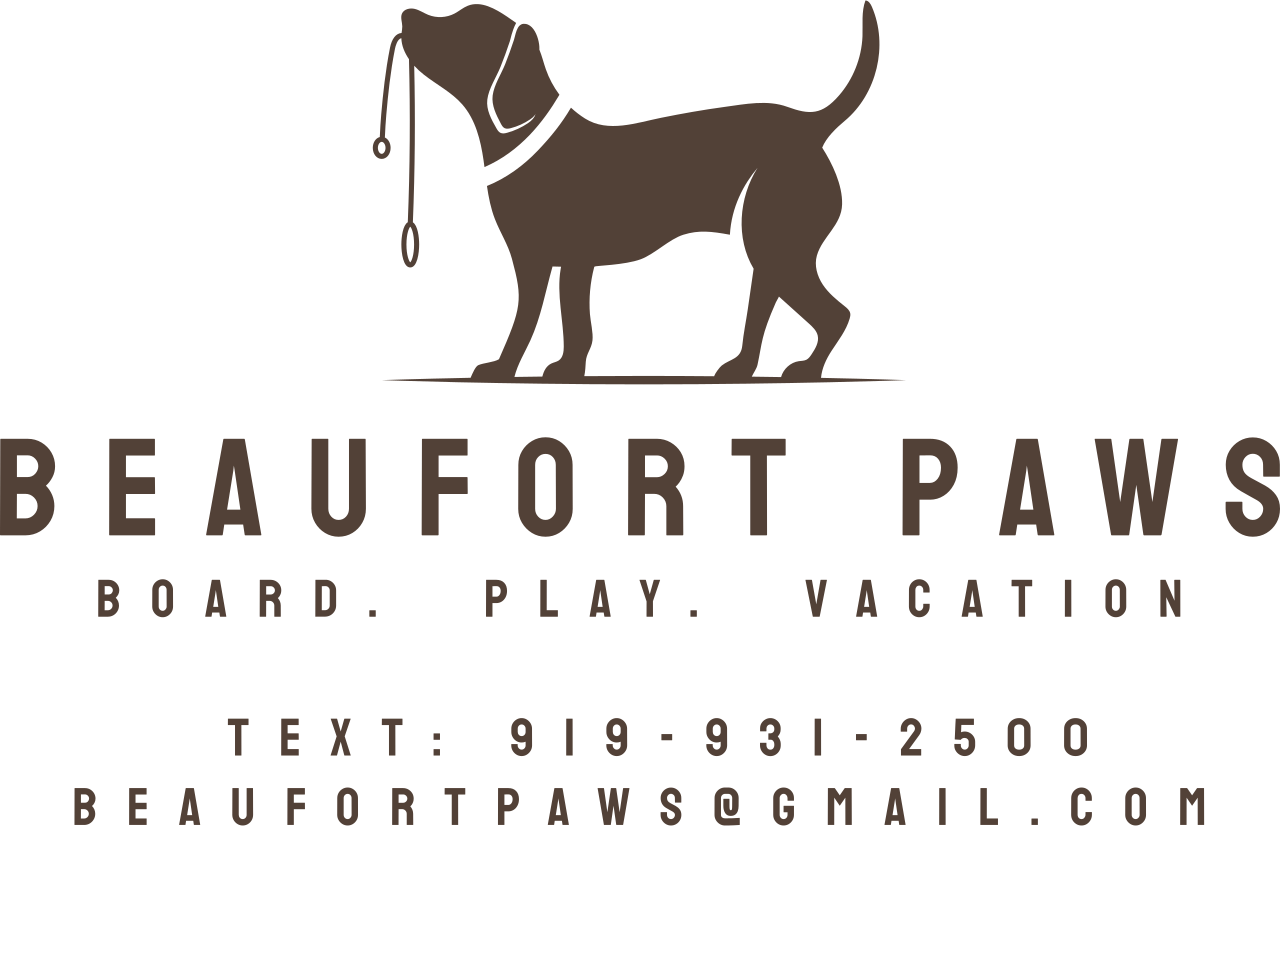 Beaufort Paws's web page